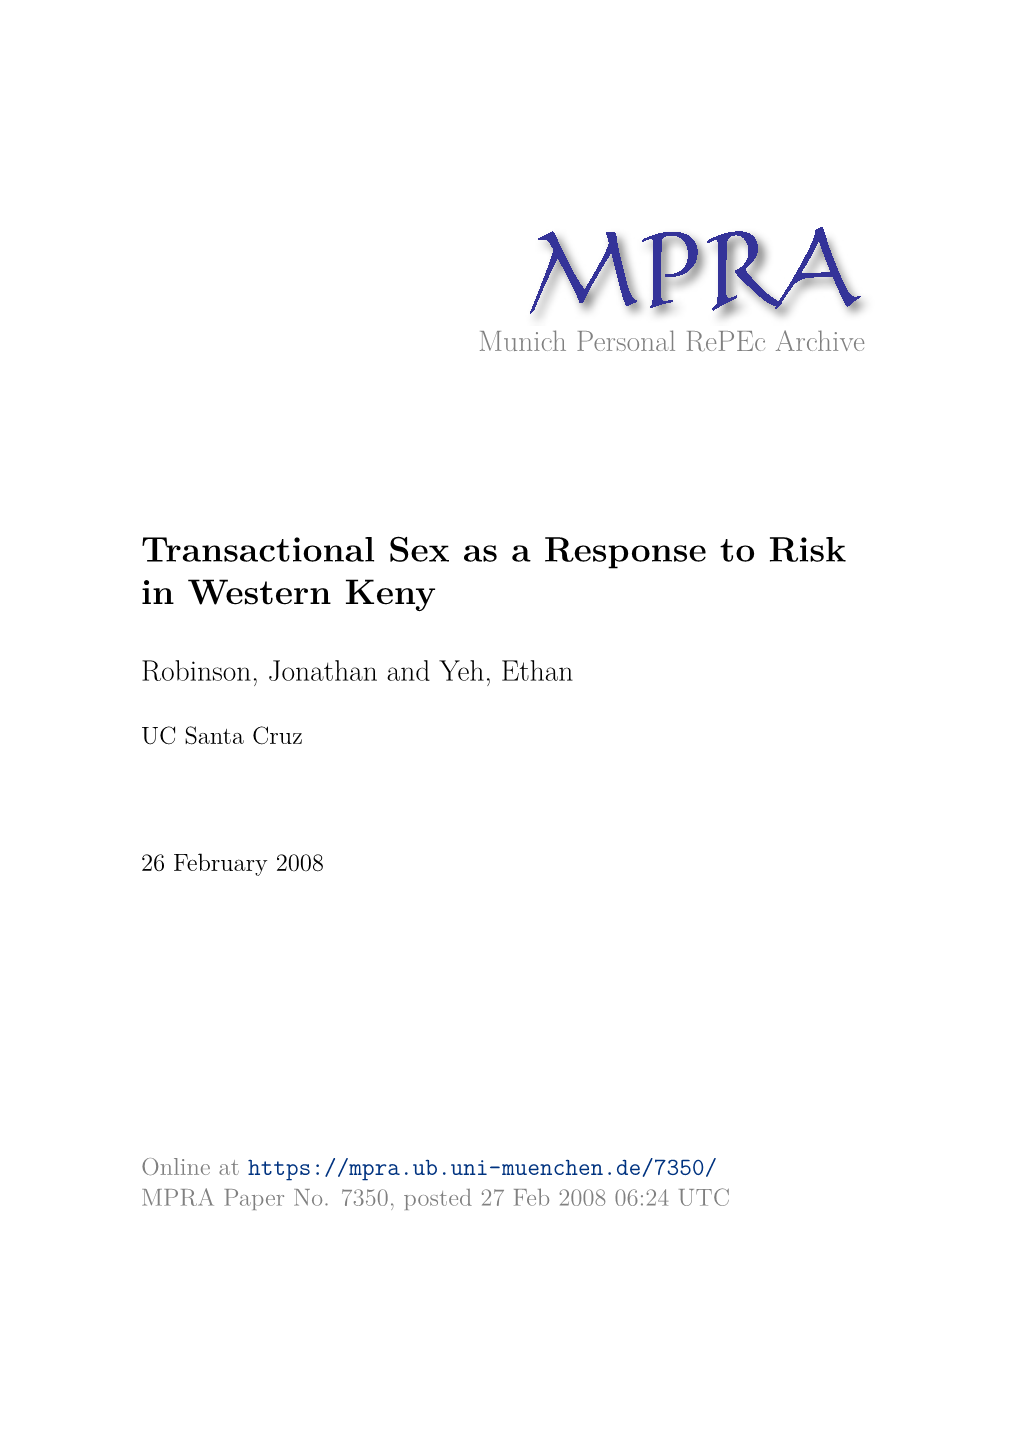 Transactional Sex As a Response to Risk in Western Keny